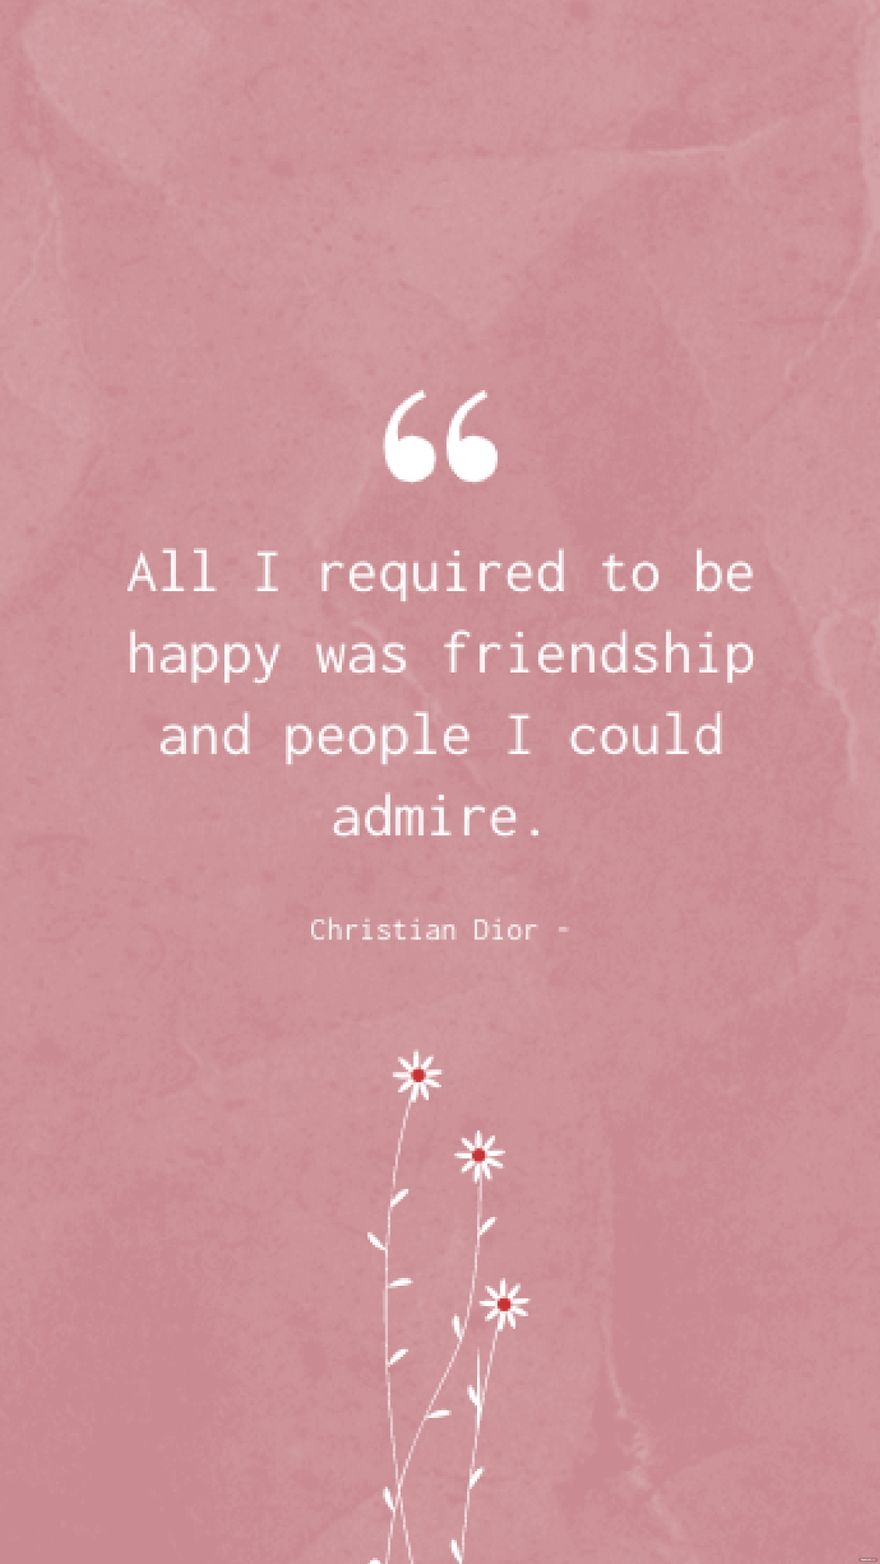 Christian Dior - All I required to be happy was friendship and people I could admire.